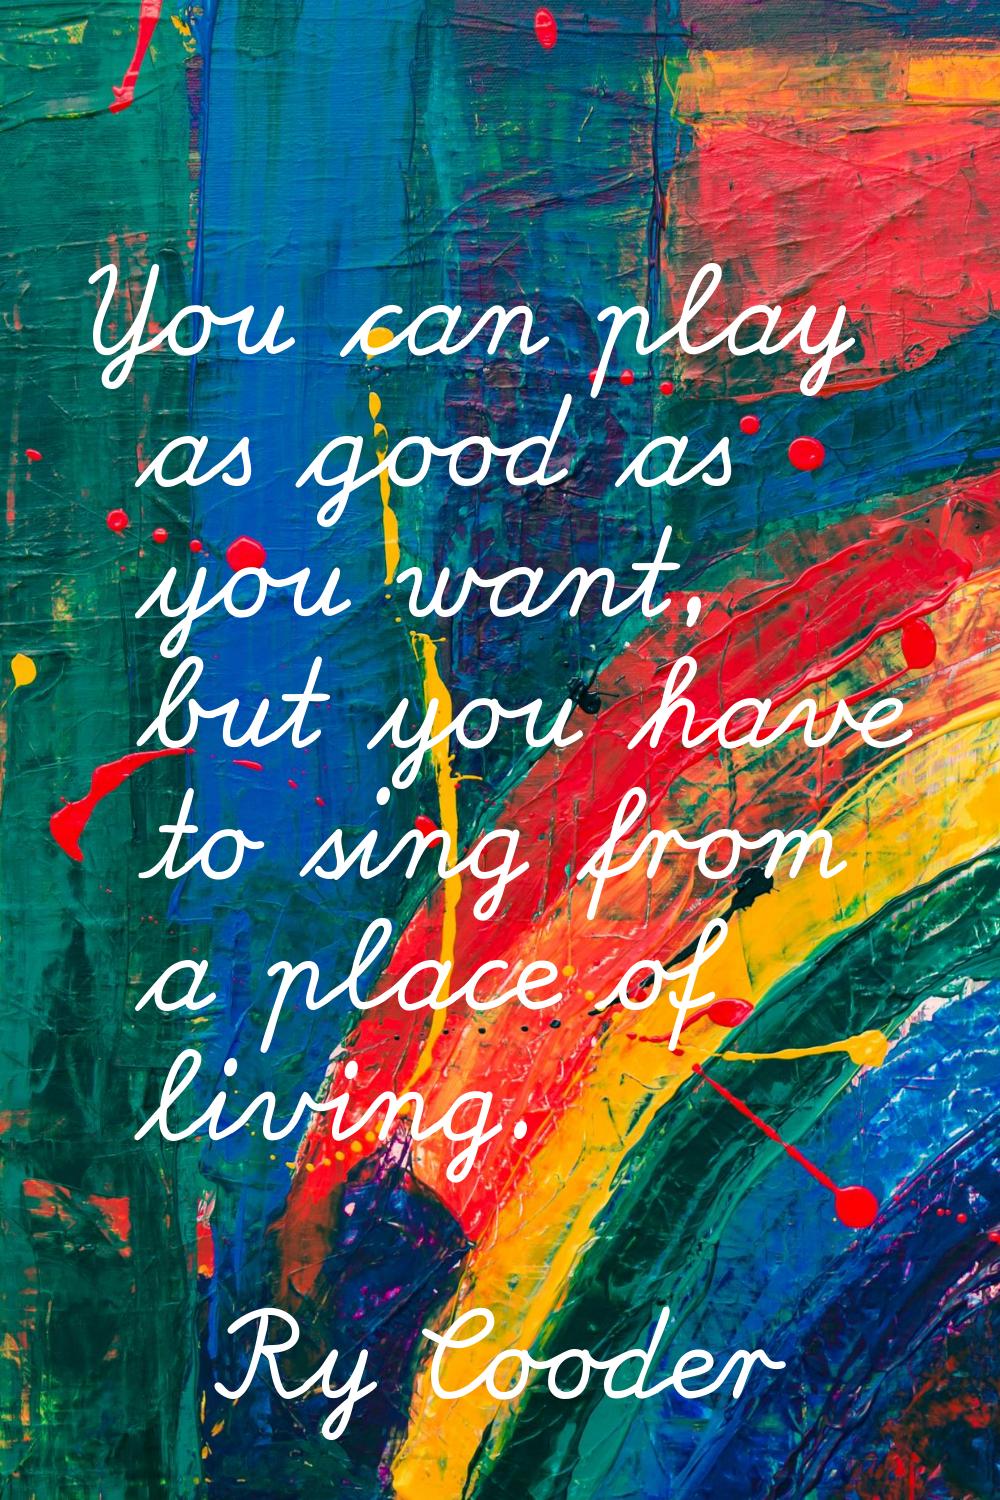 You can play as good as you want, but you have to sing from a place of living.